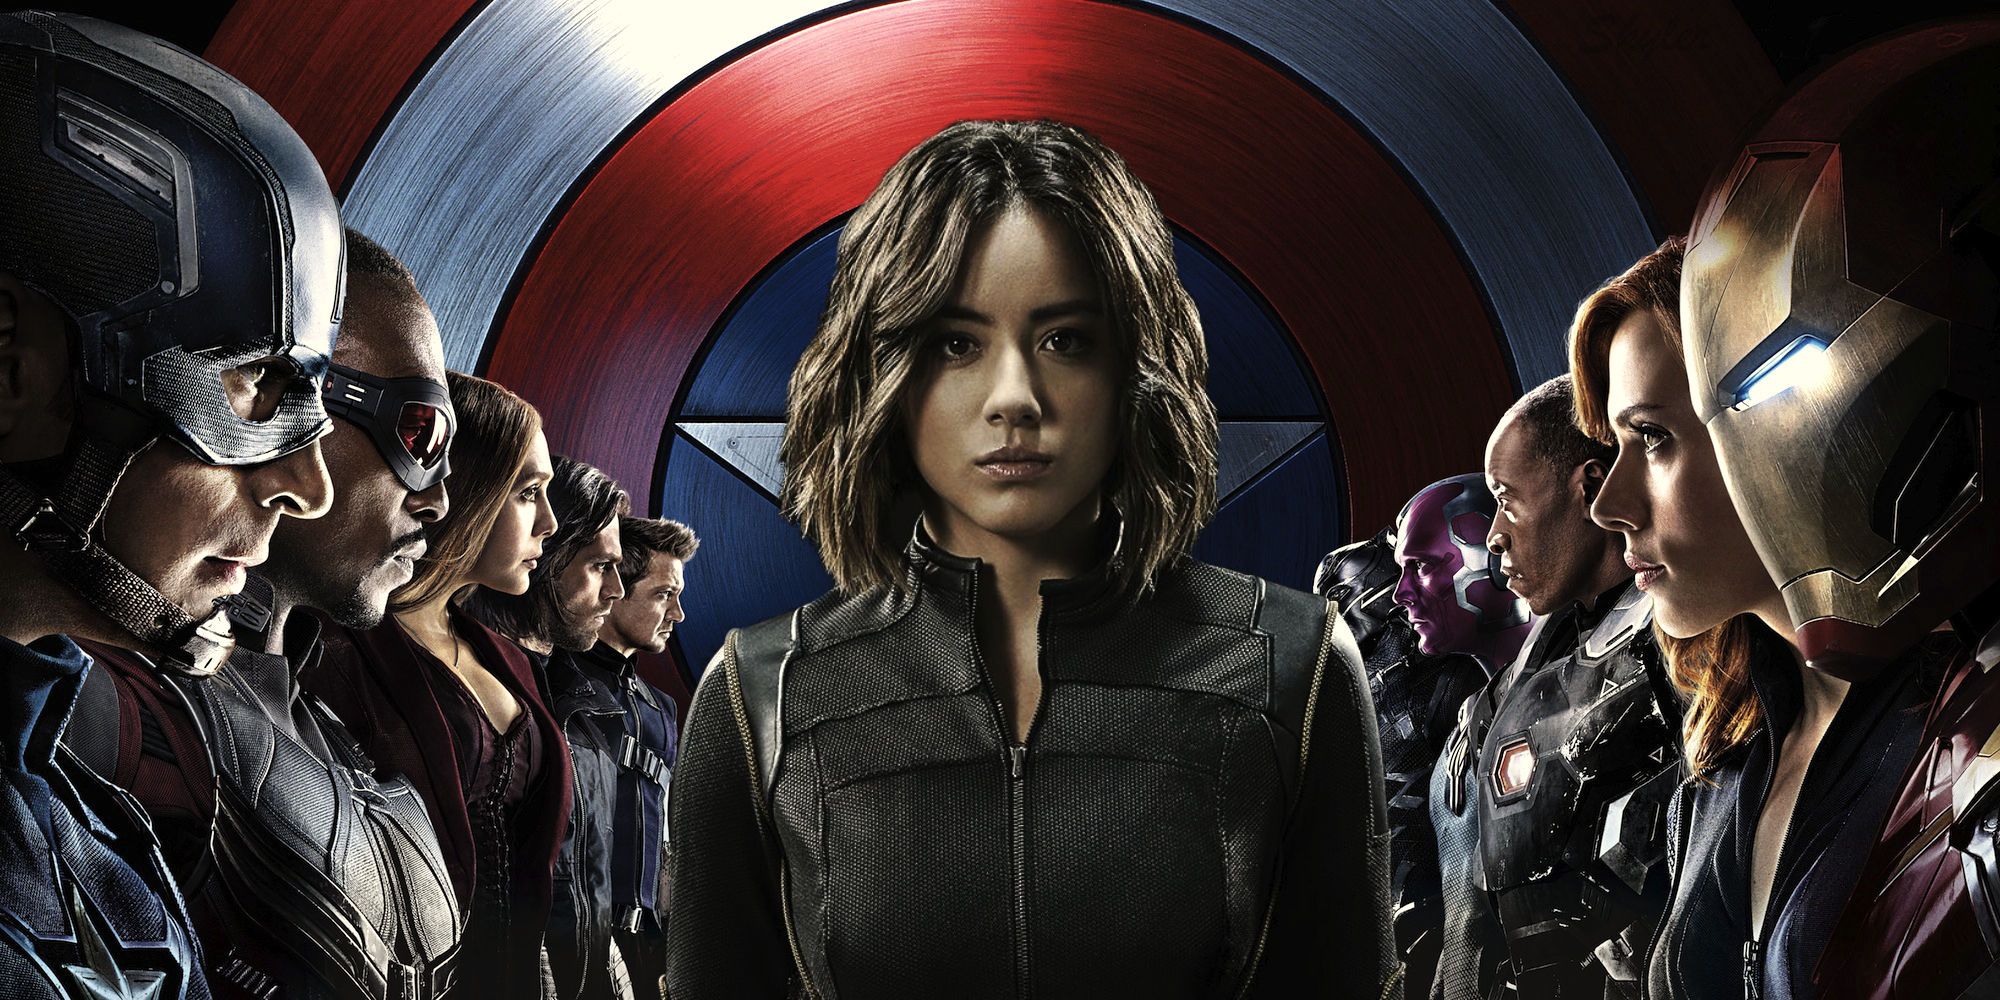 Custom image of Agents of SHIELD and Civil War poster